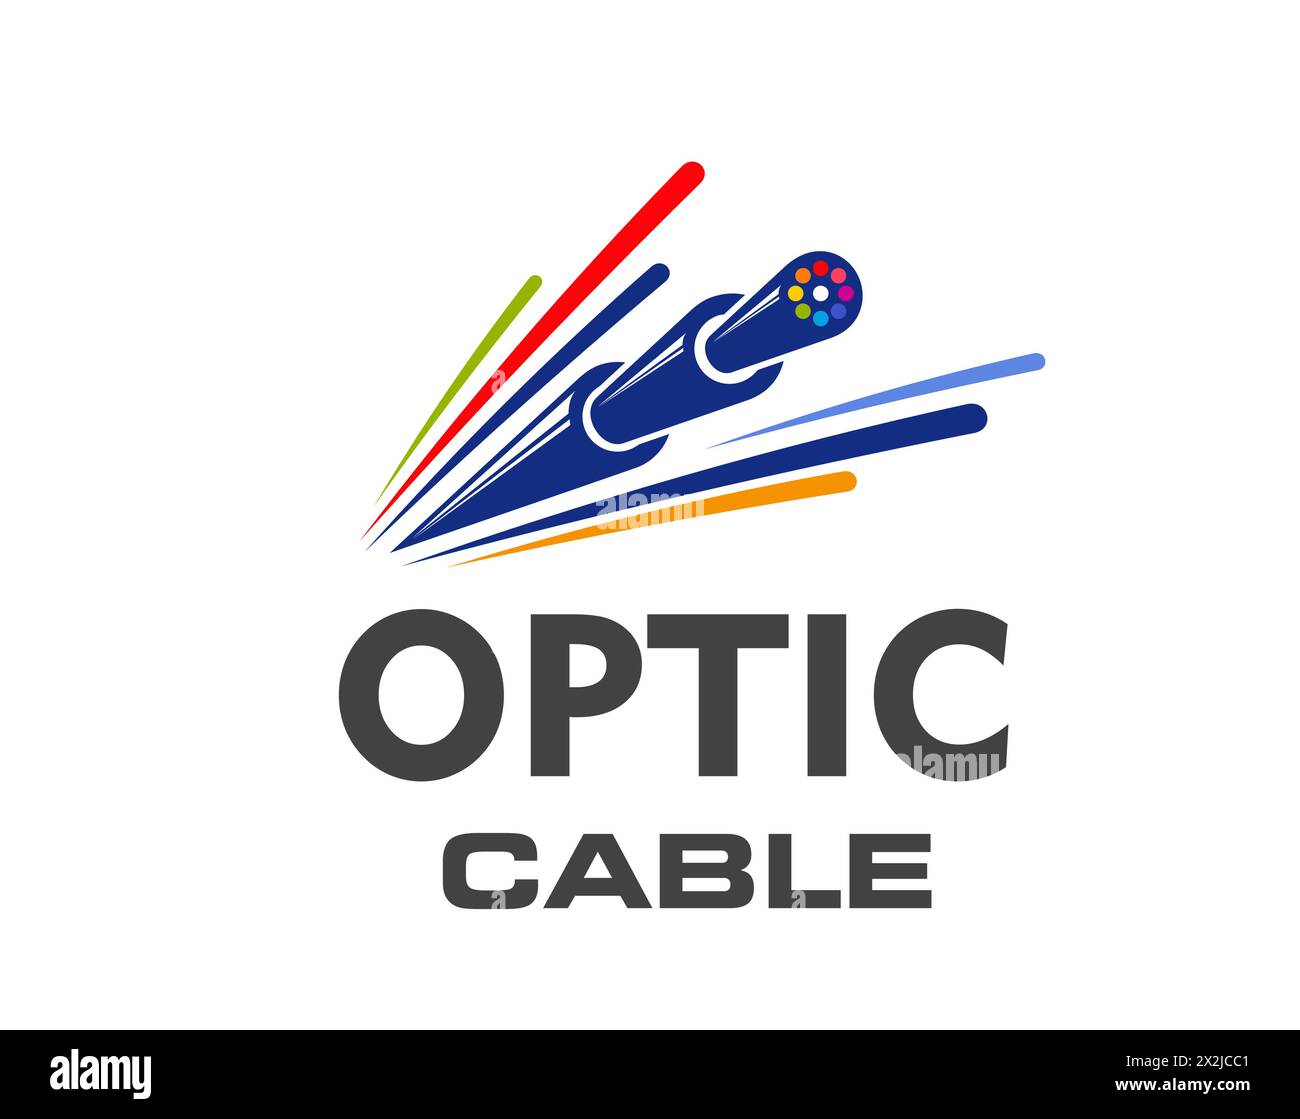 Fiber optic cable icon. Isolated vector emblem for internet connection, telecommunication technology and networking. Dynamic wire or cord with colorful lines convey speed and broadband data traffic Stock Vector